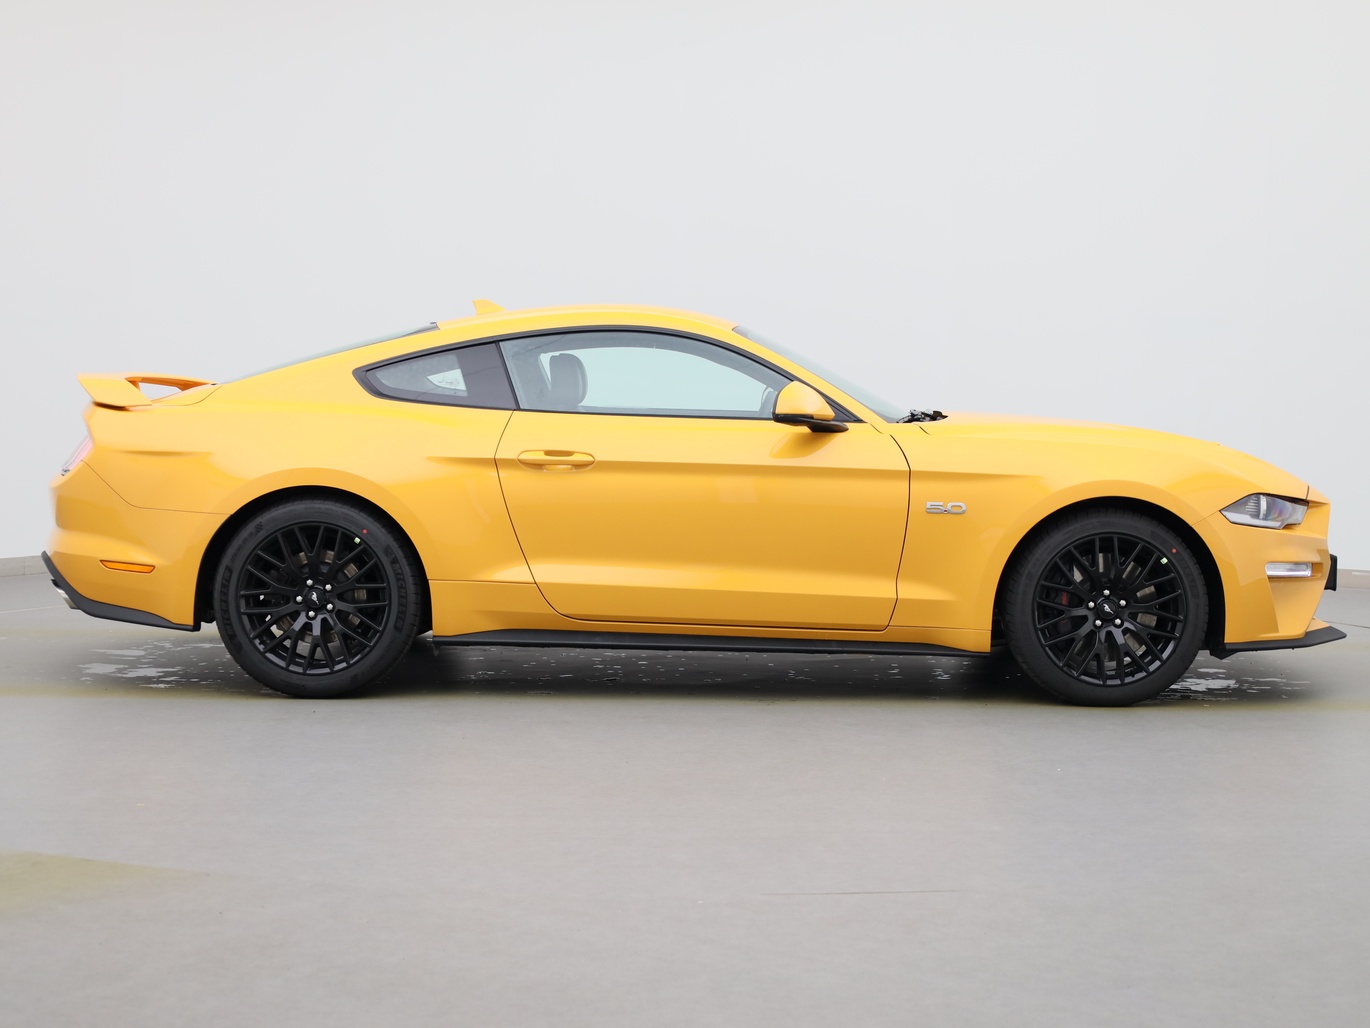  Ford Mustang GT Coupé V8 450PS / Premium 2 / Magne in Cyber Orange von Rechts